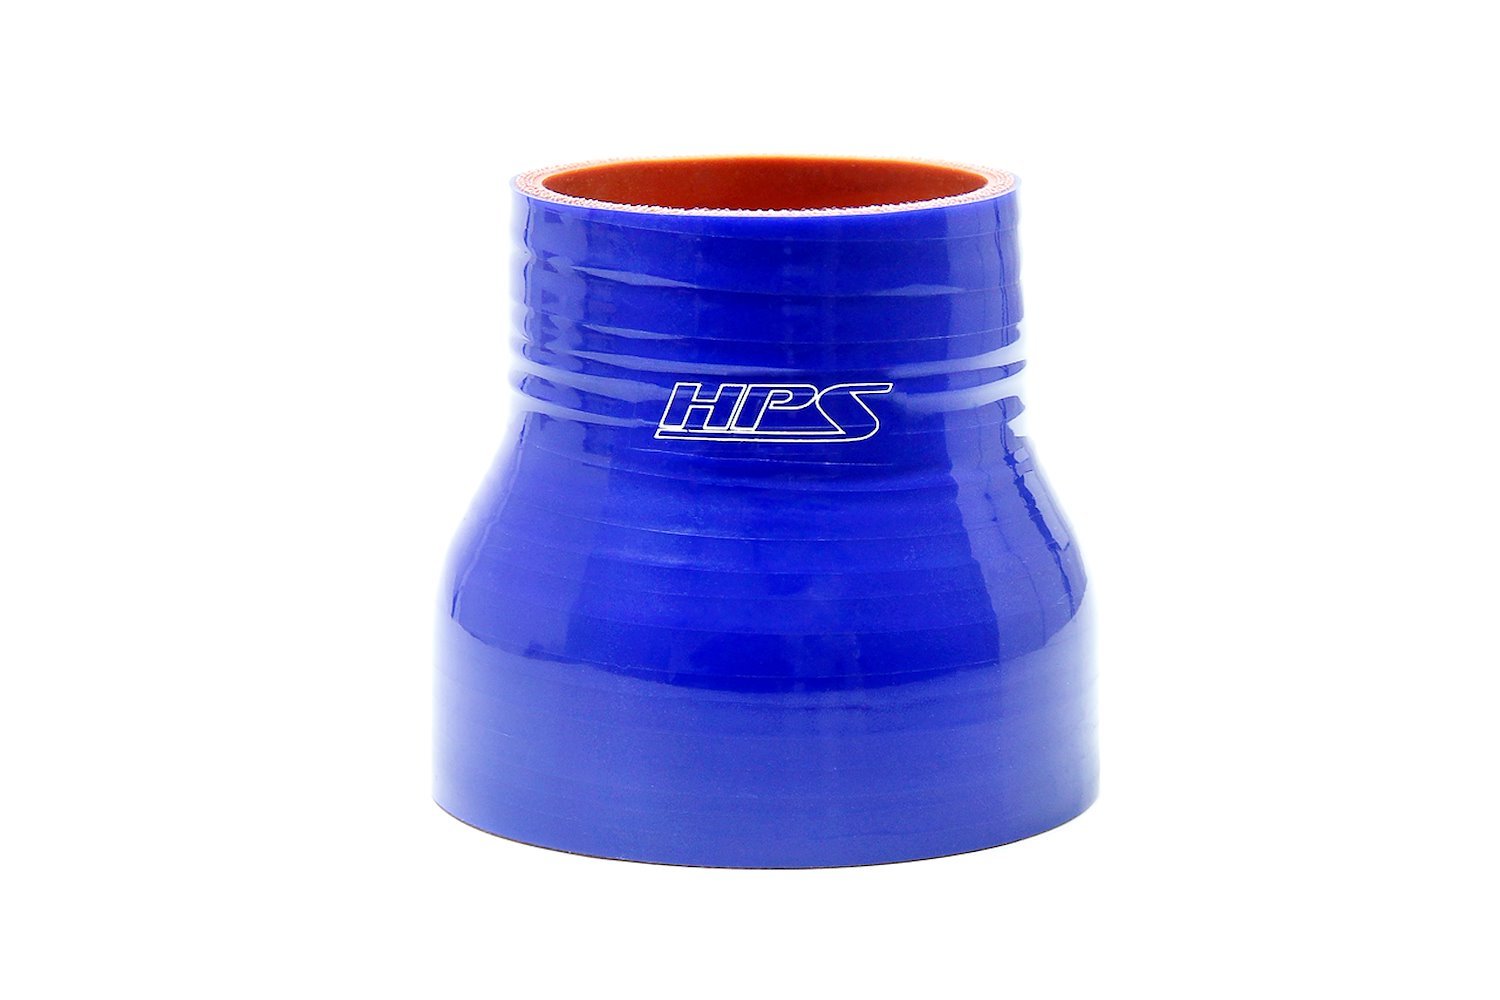 HTSR-250-275-L6-BLUE Silicone Reducer Hose, High-Temp 4-Ply Reinforced, 2-1/2 in. - 2-3/4 in. ID, 6 in. Long, Blue